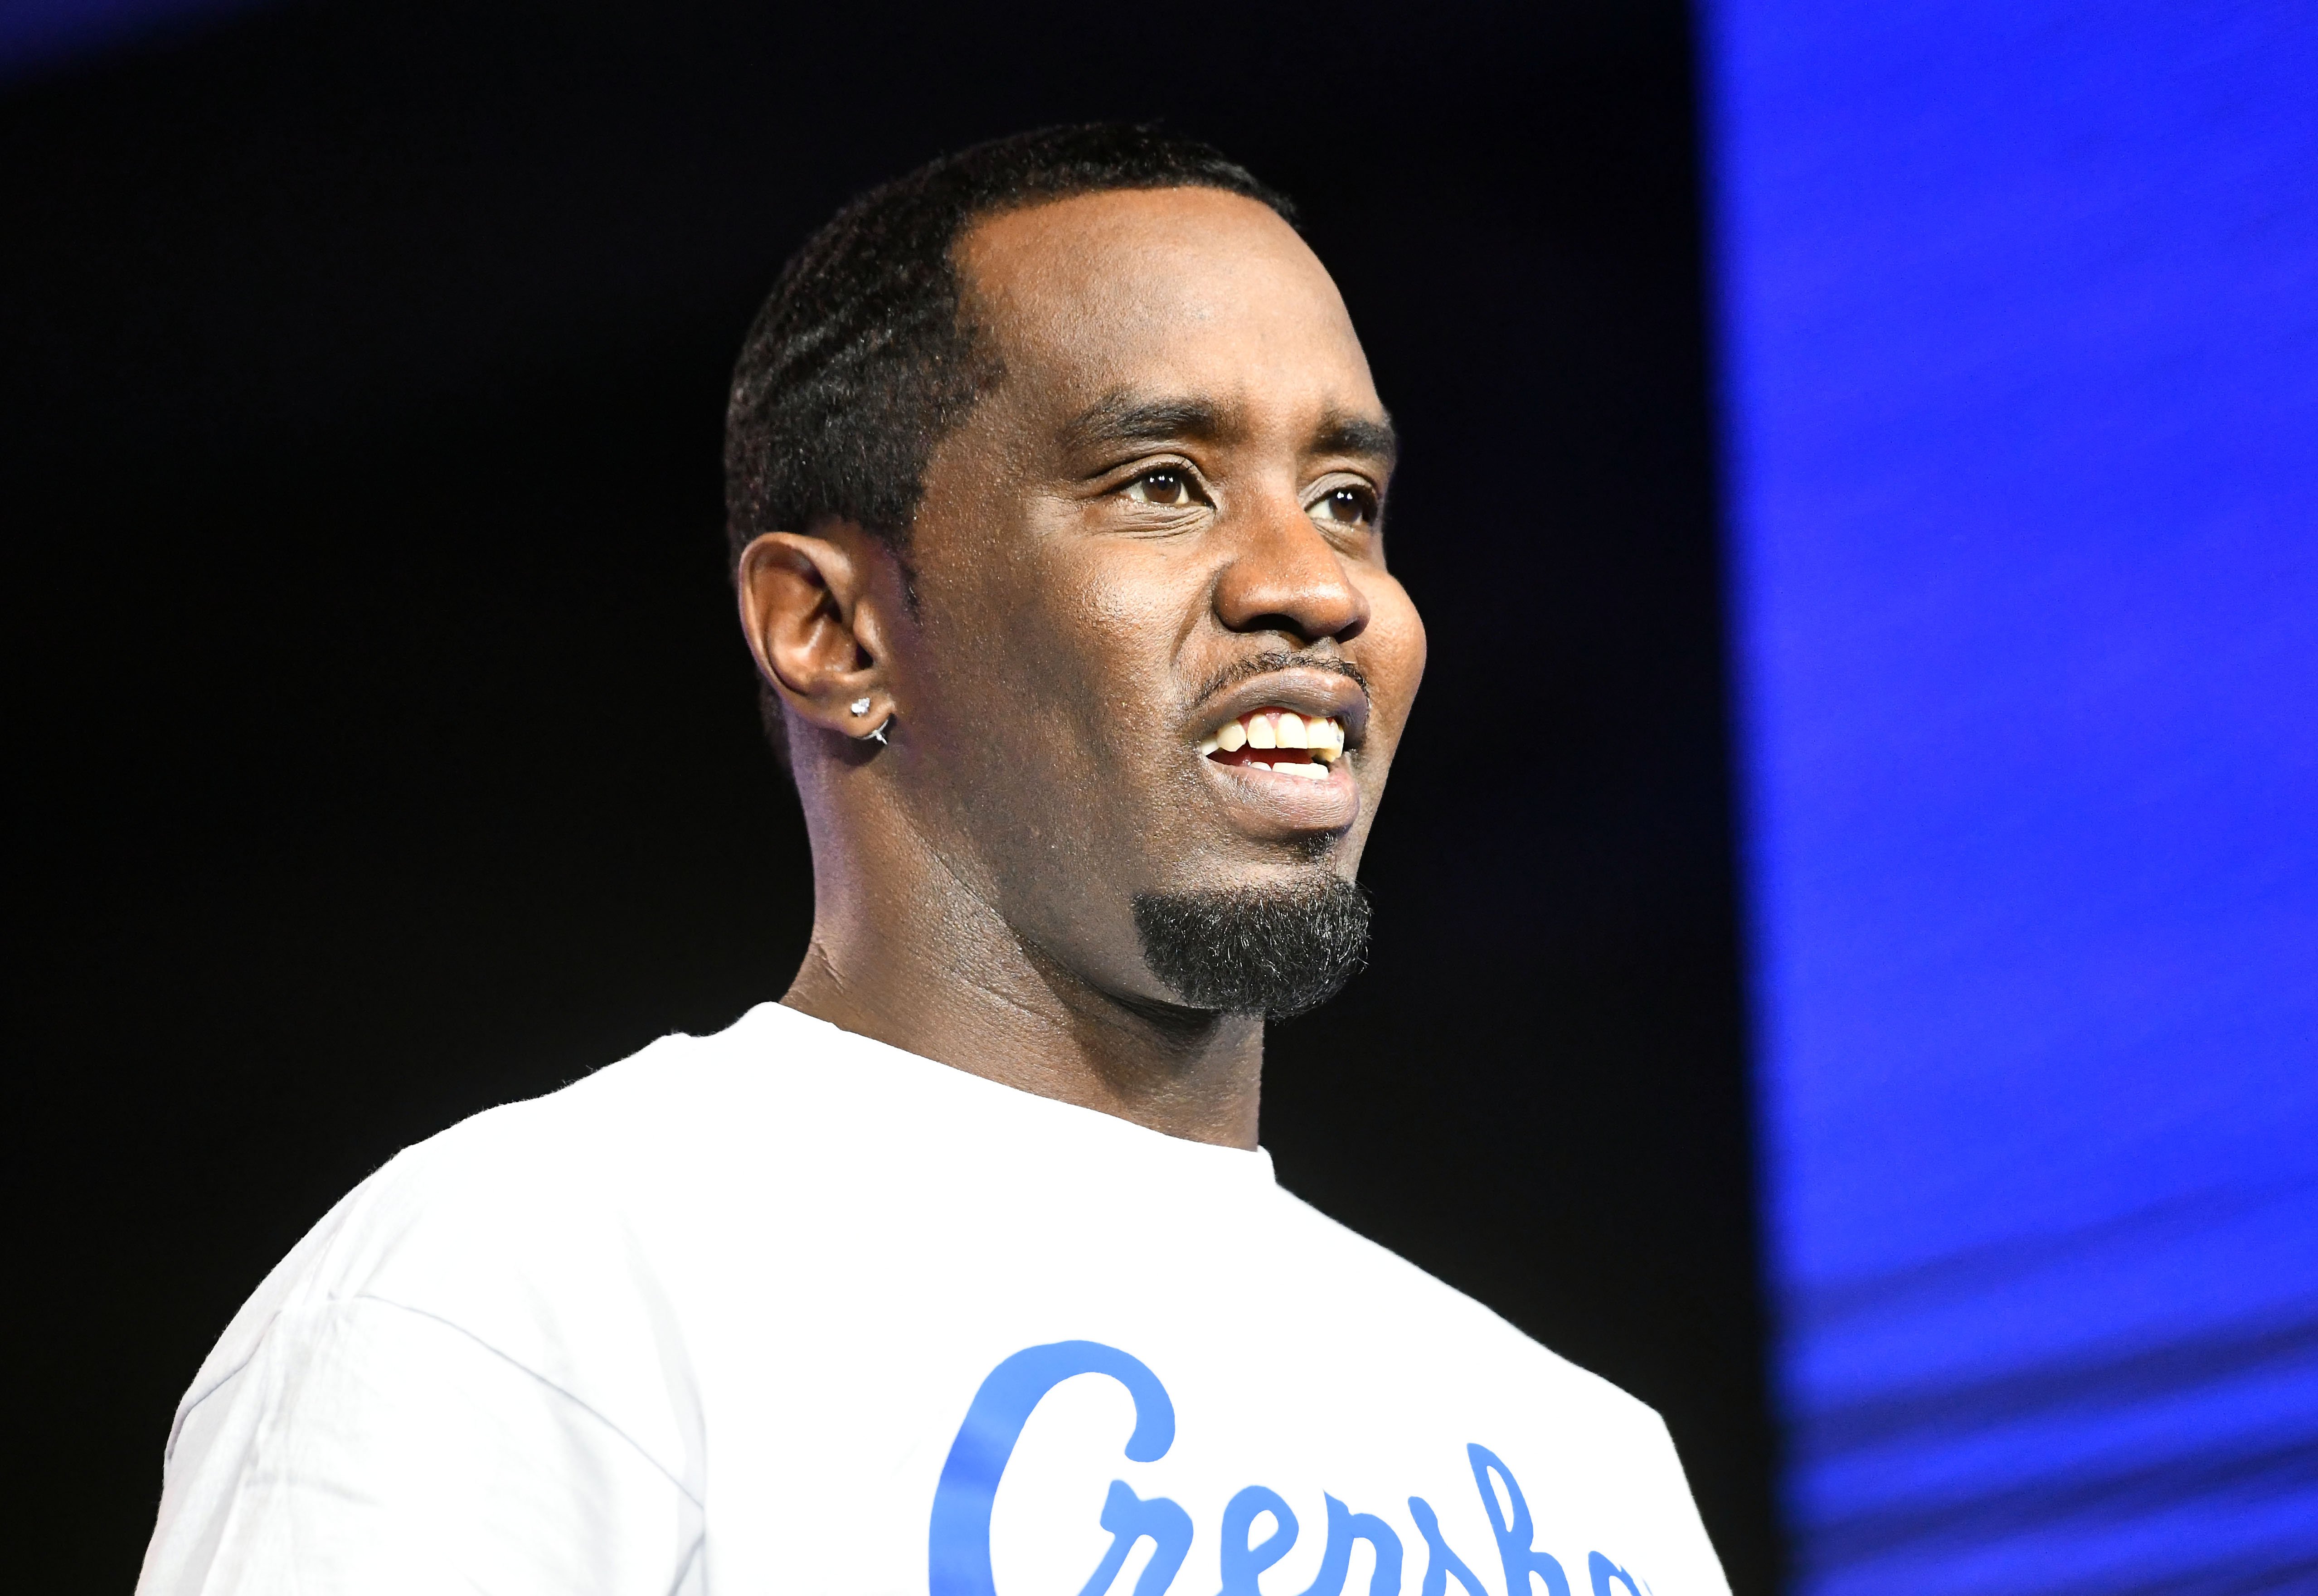 Rapper Sean 'Diddy' Combs attends the REVOLT & AT&T Summit on October 25, 2019. | Photo: Getty Images